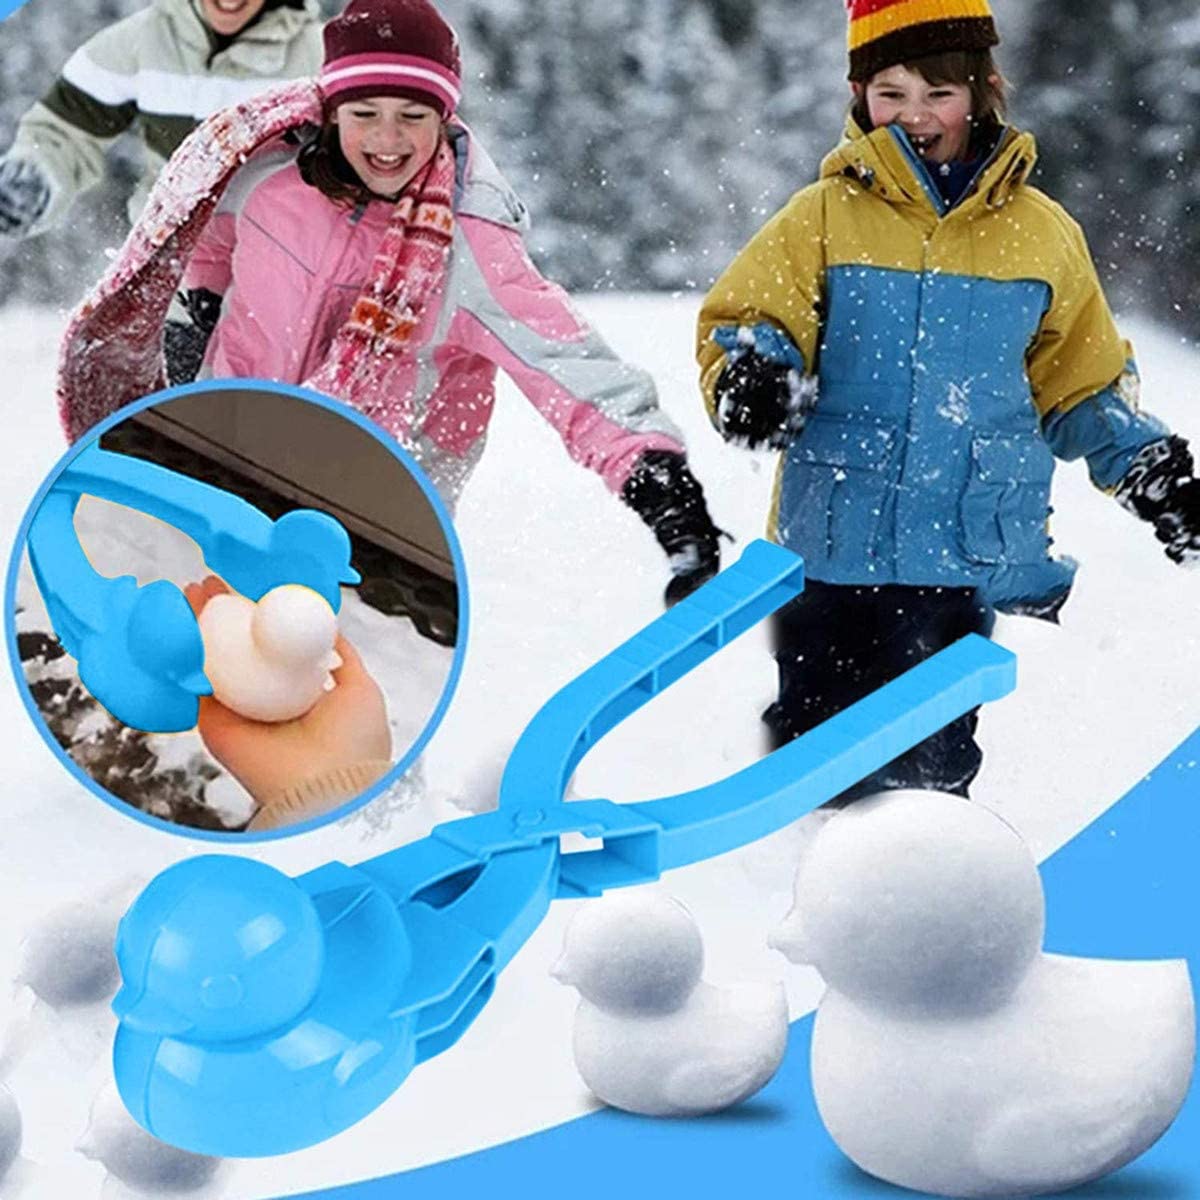 Duck shaped snowball maker - Duck snow clamp toy makes duck shaped snowballs